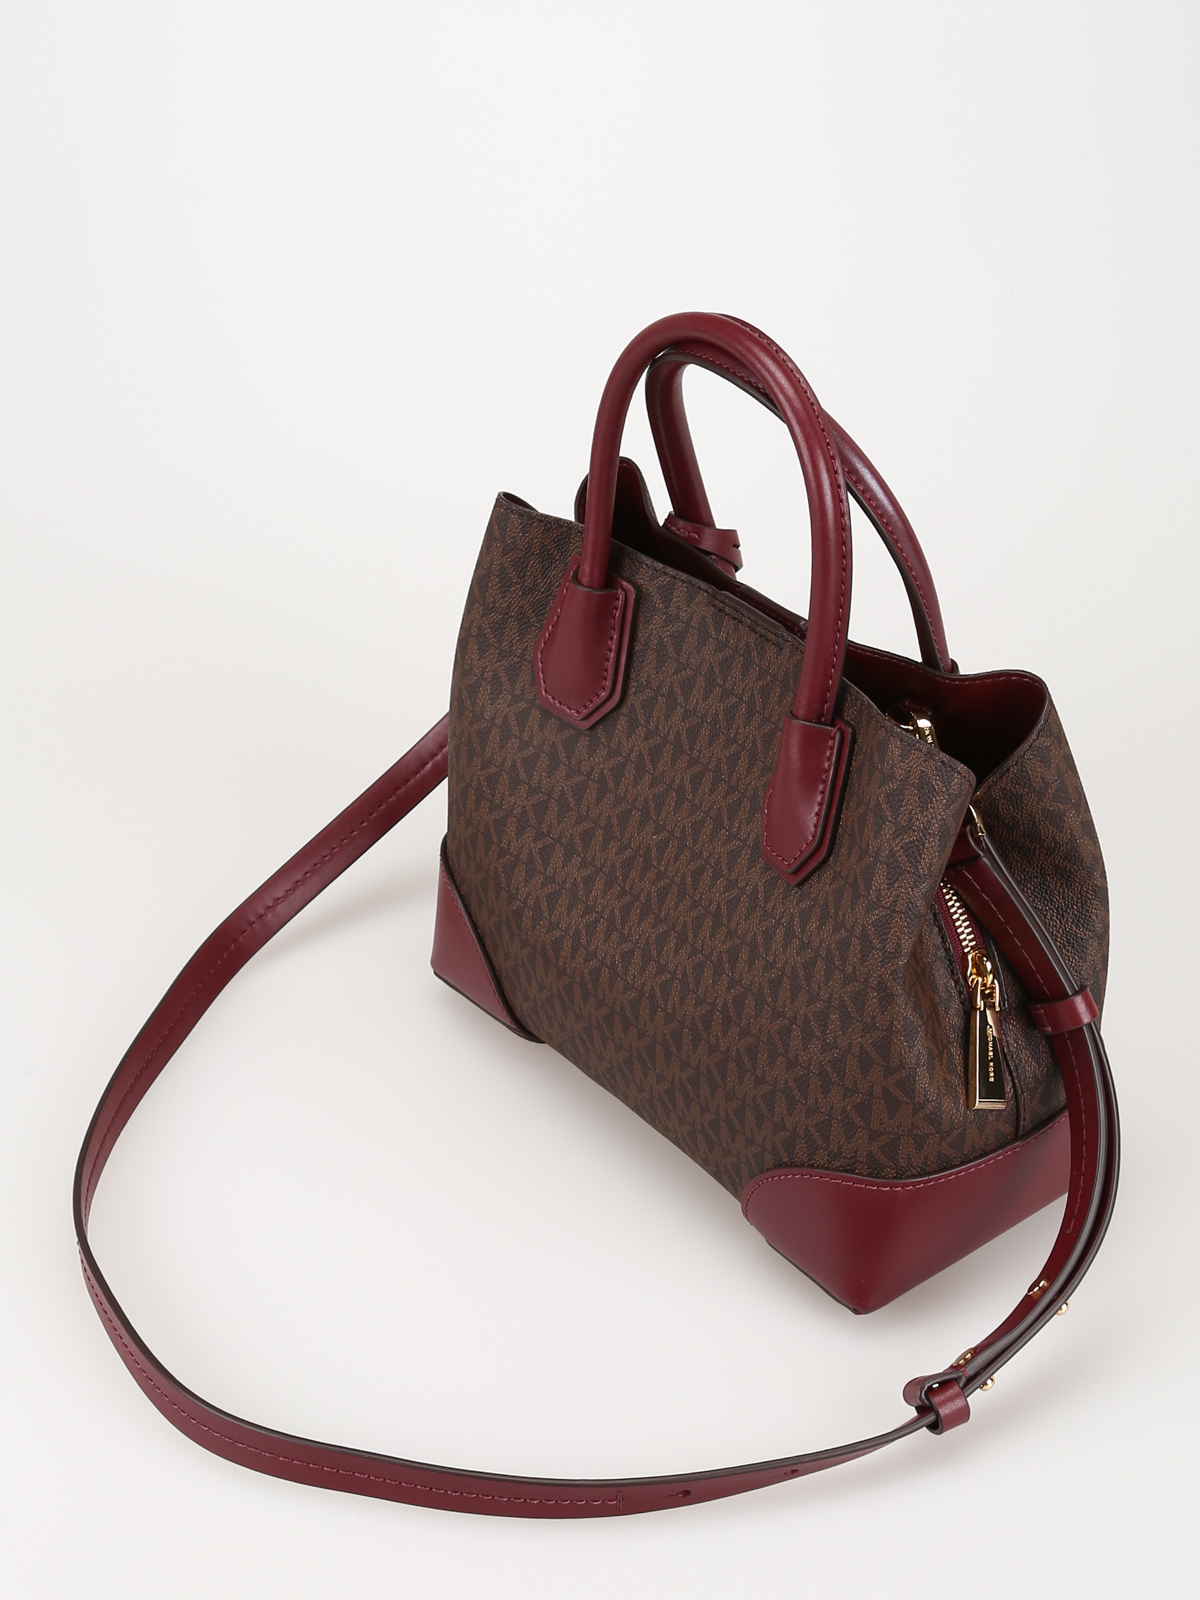 Michael Kors Brown/Burgundy Signature Coated Canvas and Leather